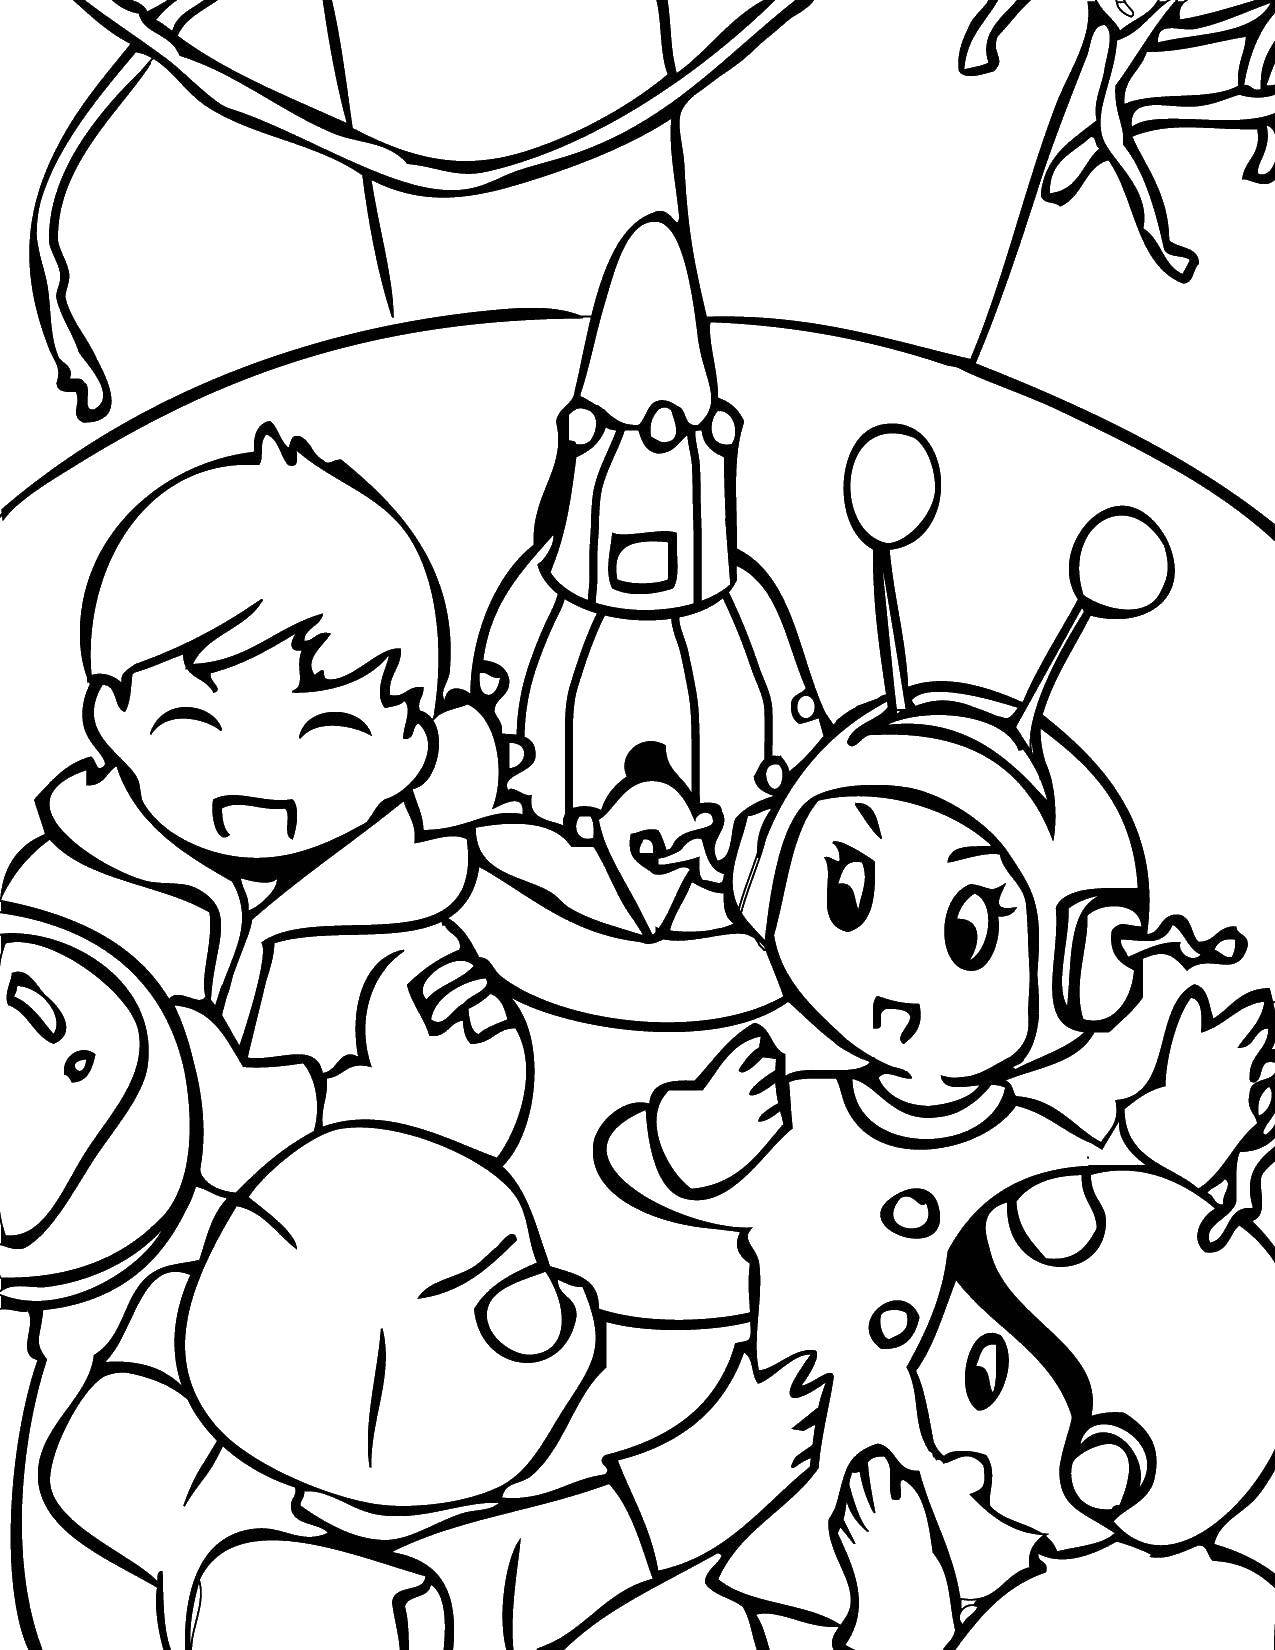 Coloring Life in space. Category Space. Tags:  space, people.